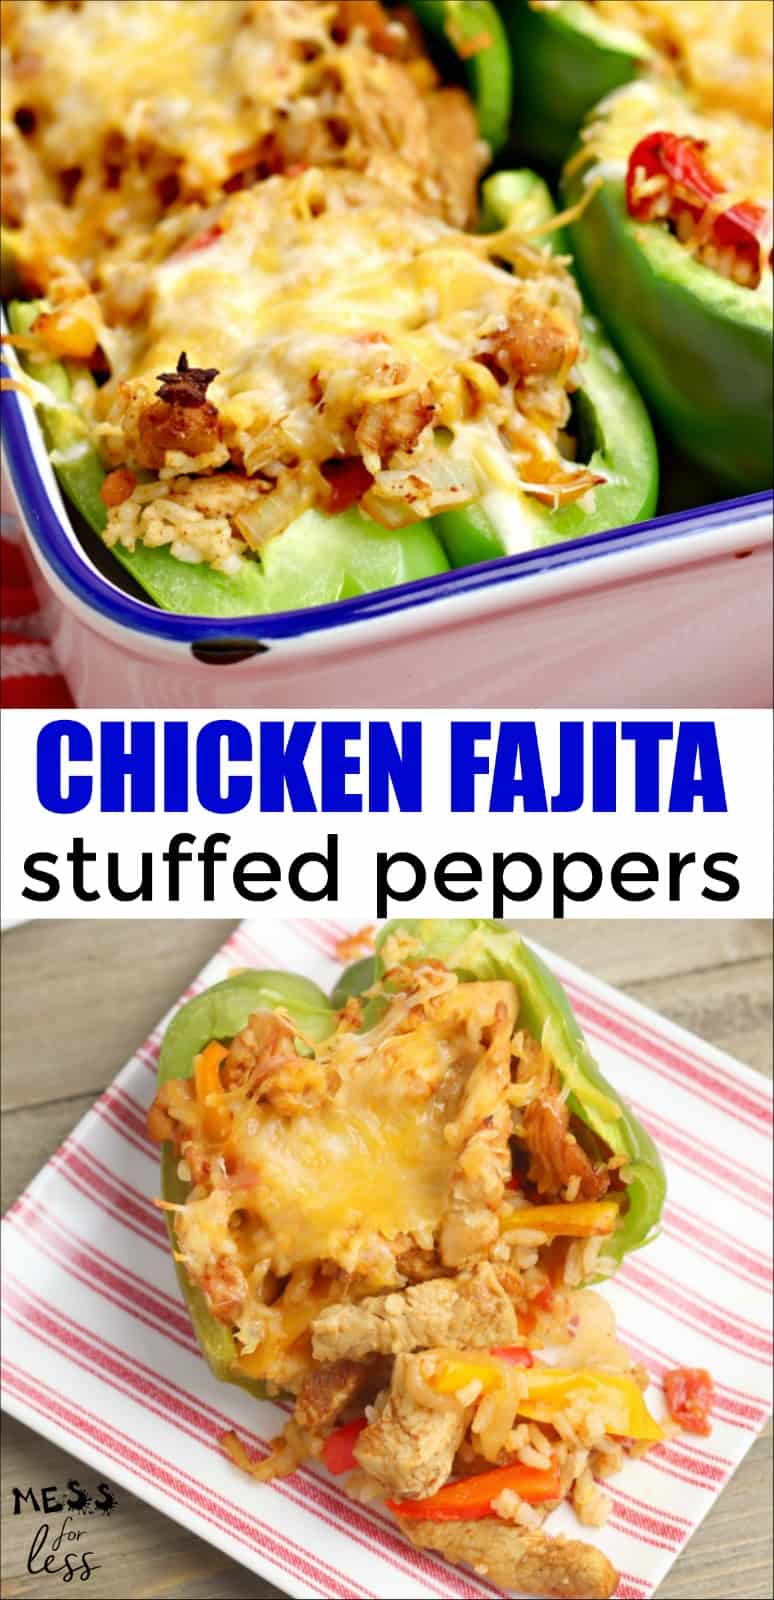 If you love chicken fajitas, then you need to try these Chicken Stuffed Peppers. Stuffed with your favorite fajita ingredients, these peppers are colorful and filling. 